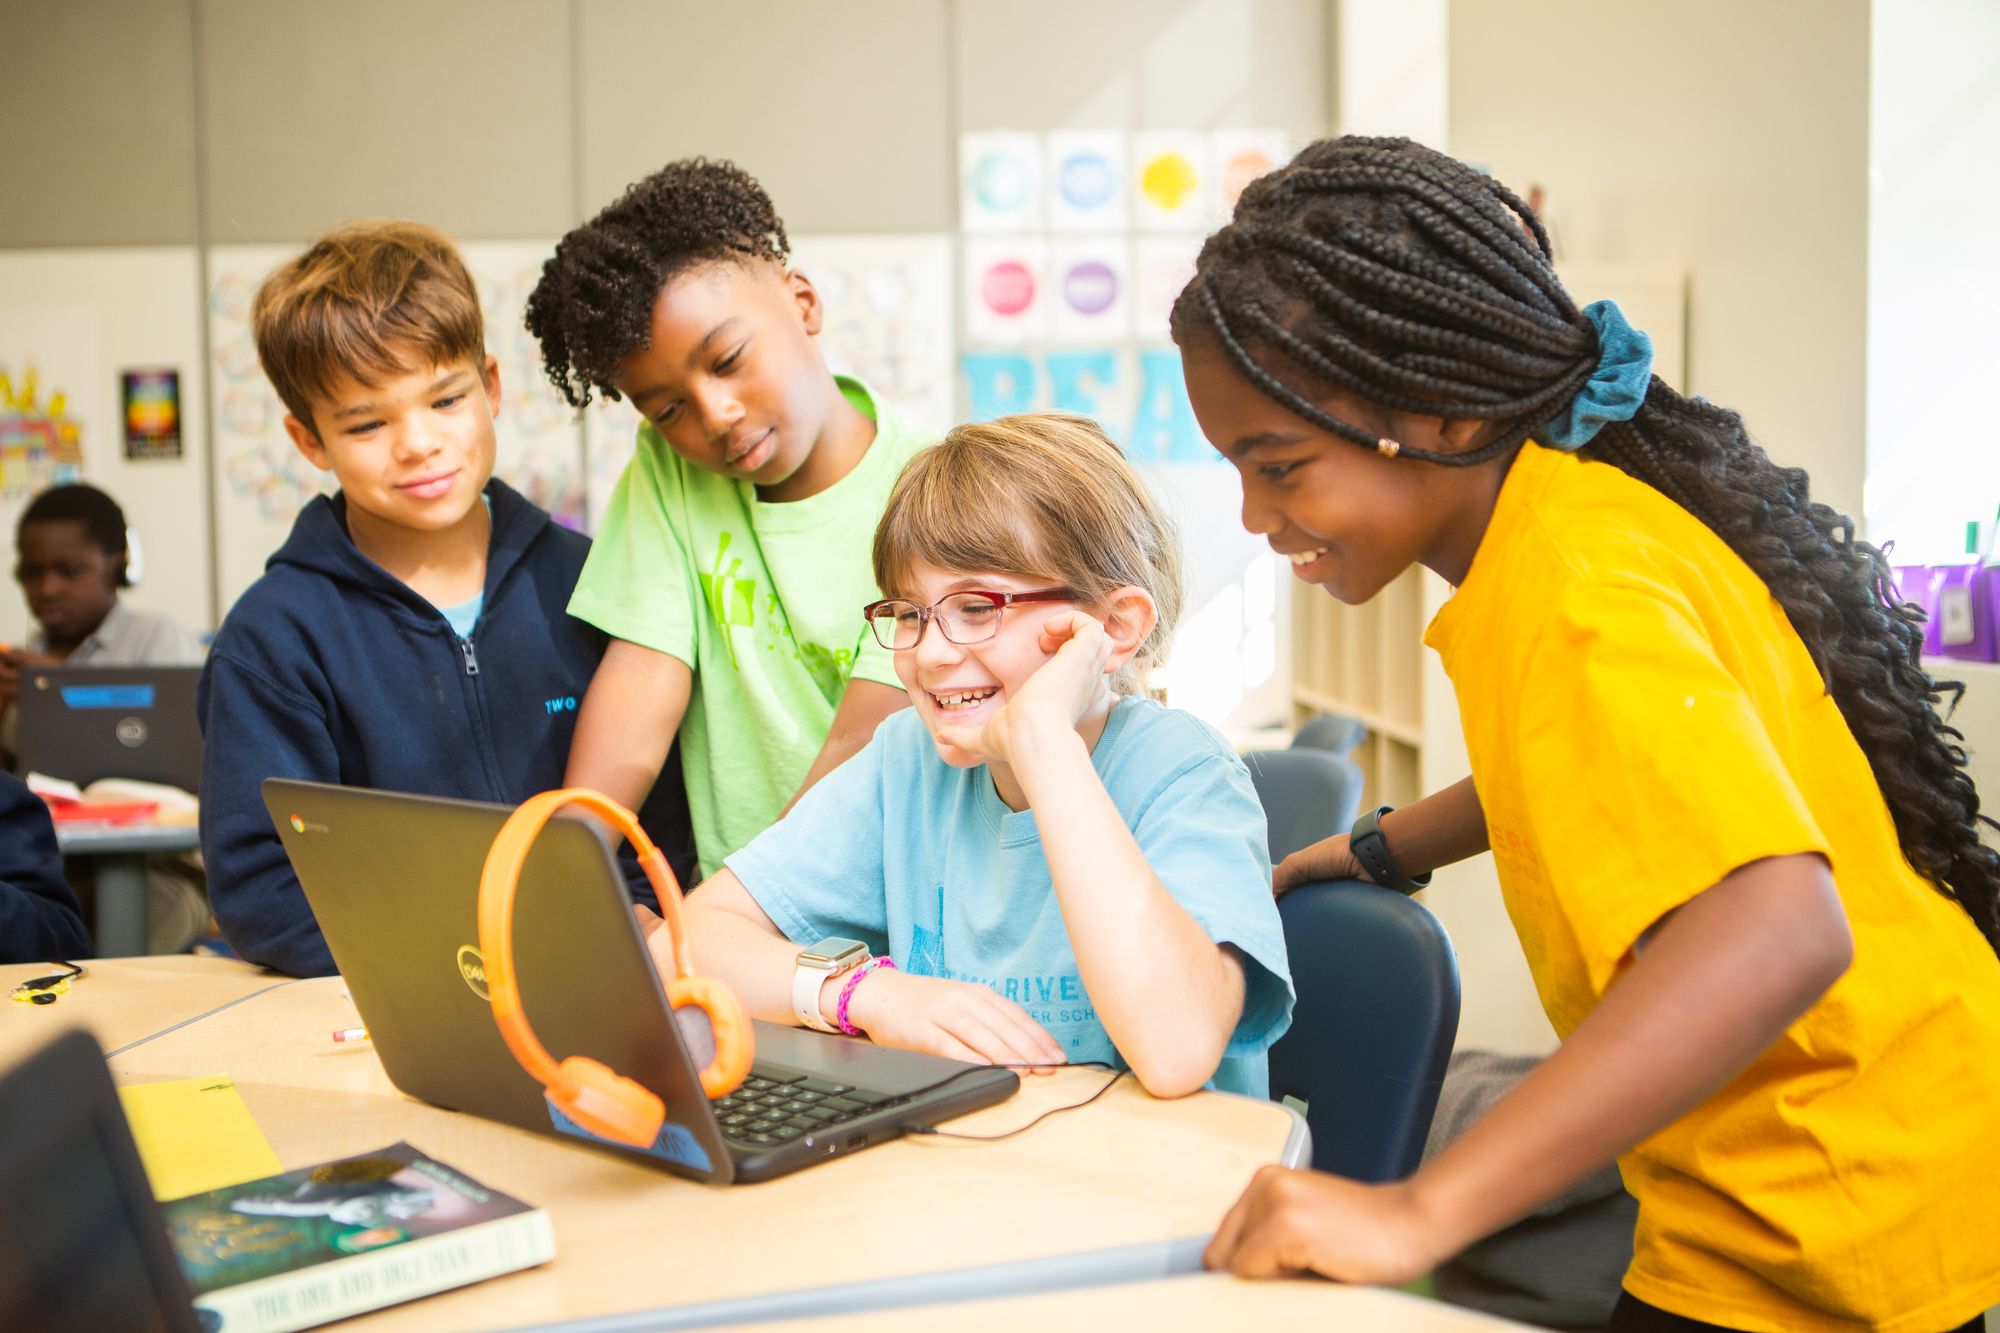 Four students gathered around a computer smiling.